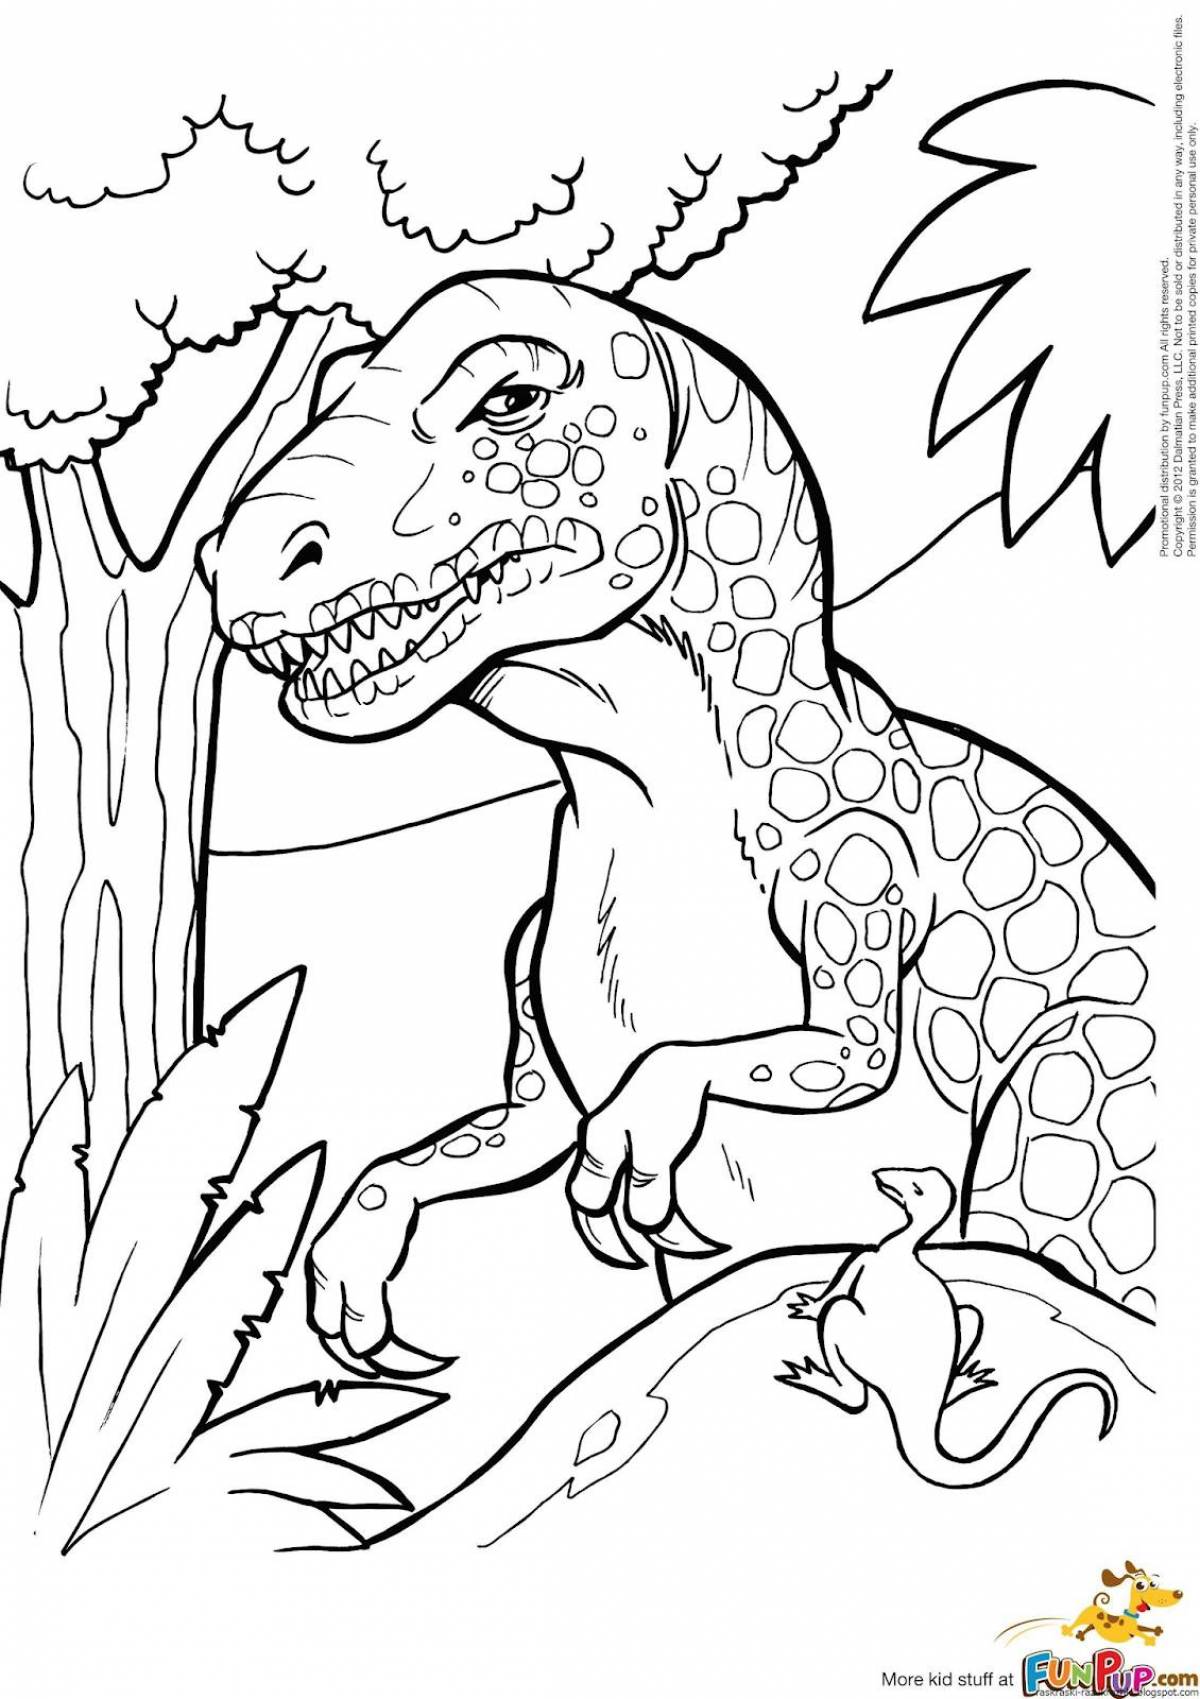 Animated dinosaur coloring pages for kids